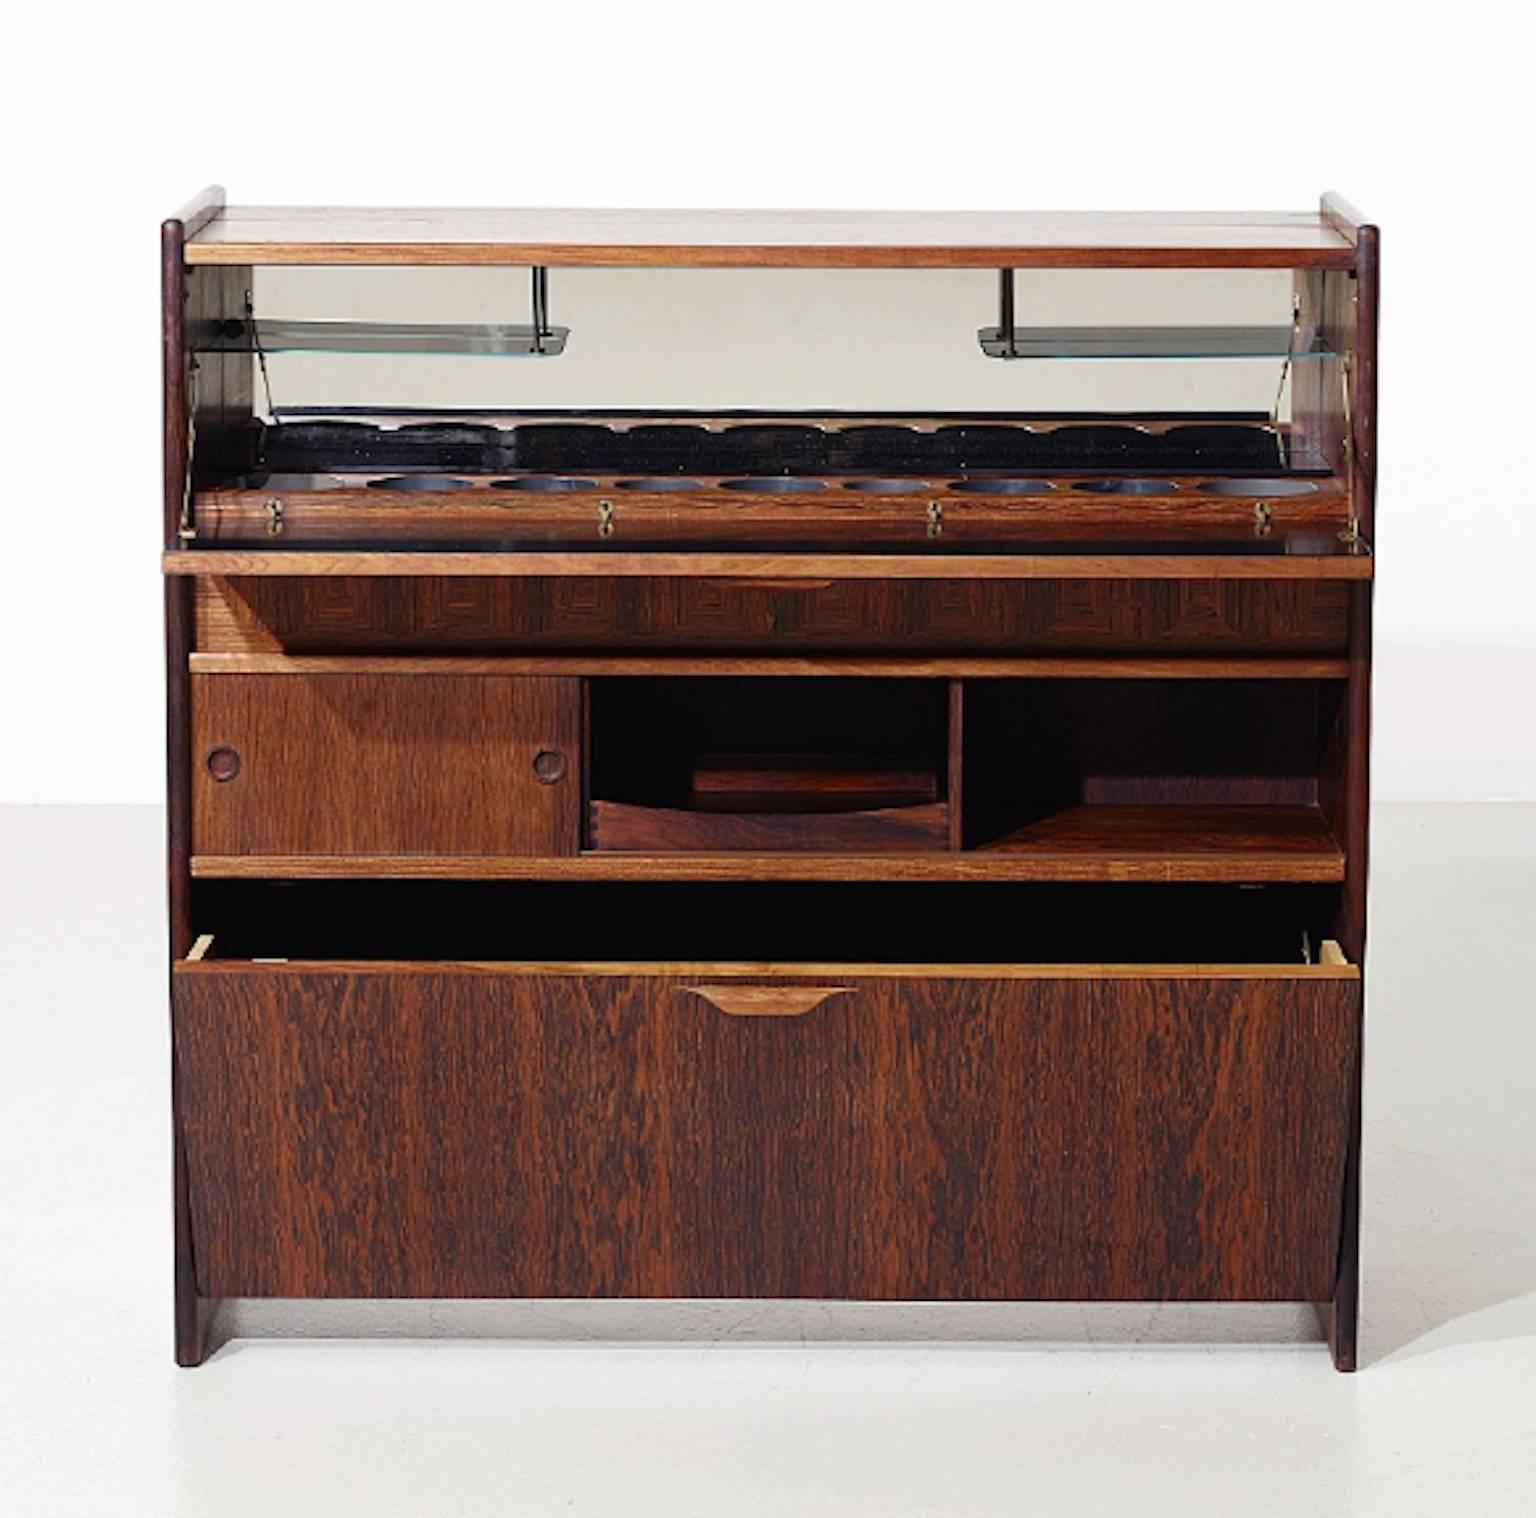 Rosewood bar cabinet designed by Johannes Andersen. The bar is made for serving on one side and sitting on the other side, featuring a mirror, glass shelves, sliding door and space for bottles. Foldable top turns into a bar top; metal rod to rest